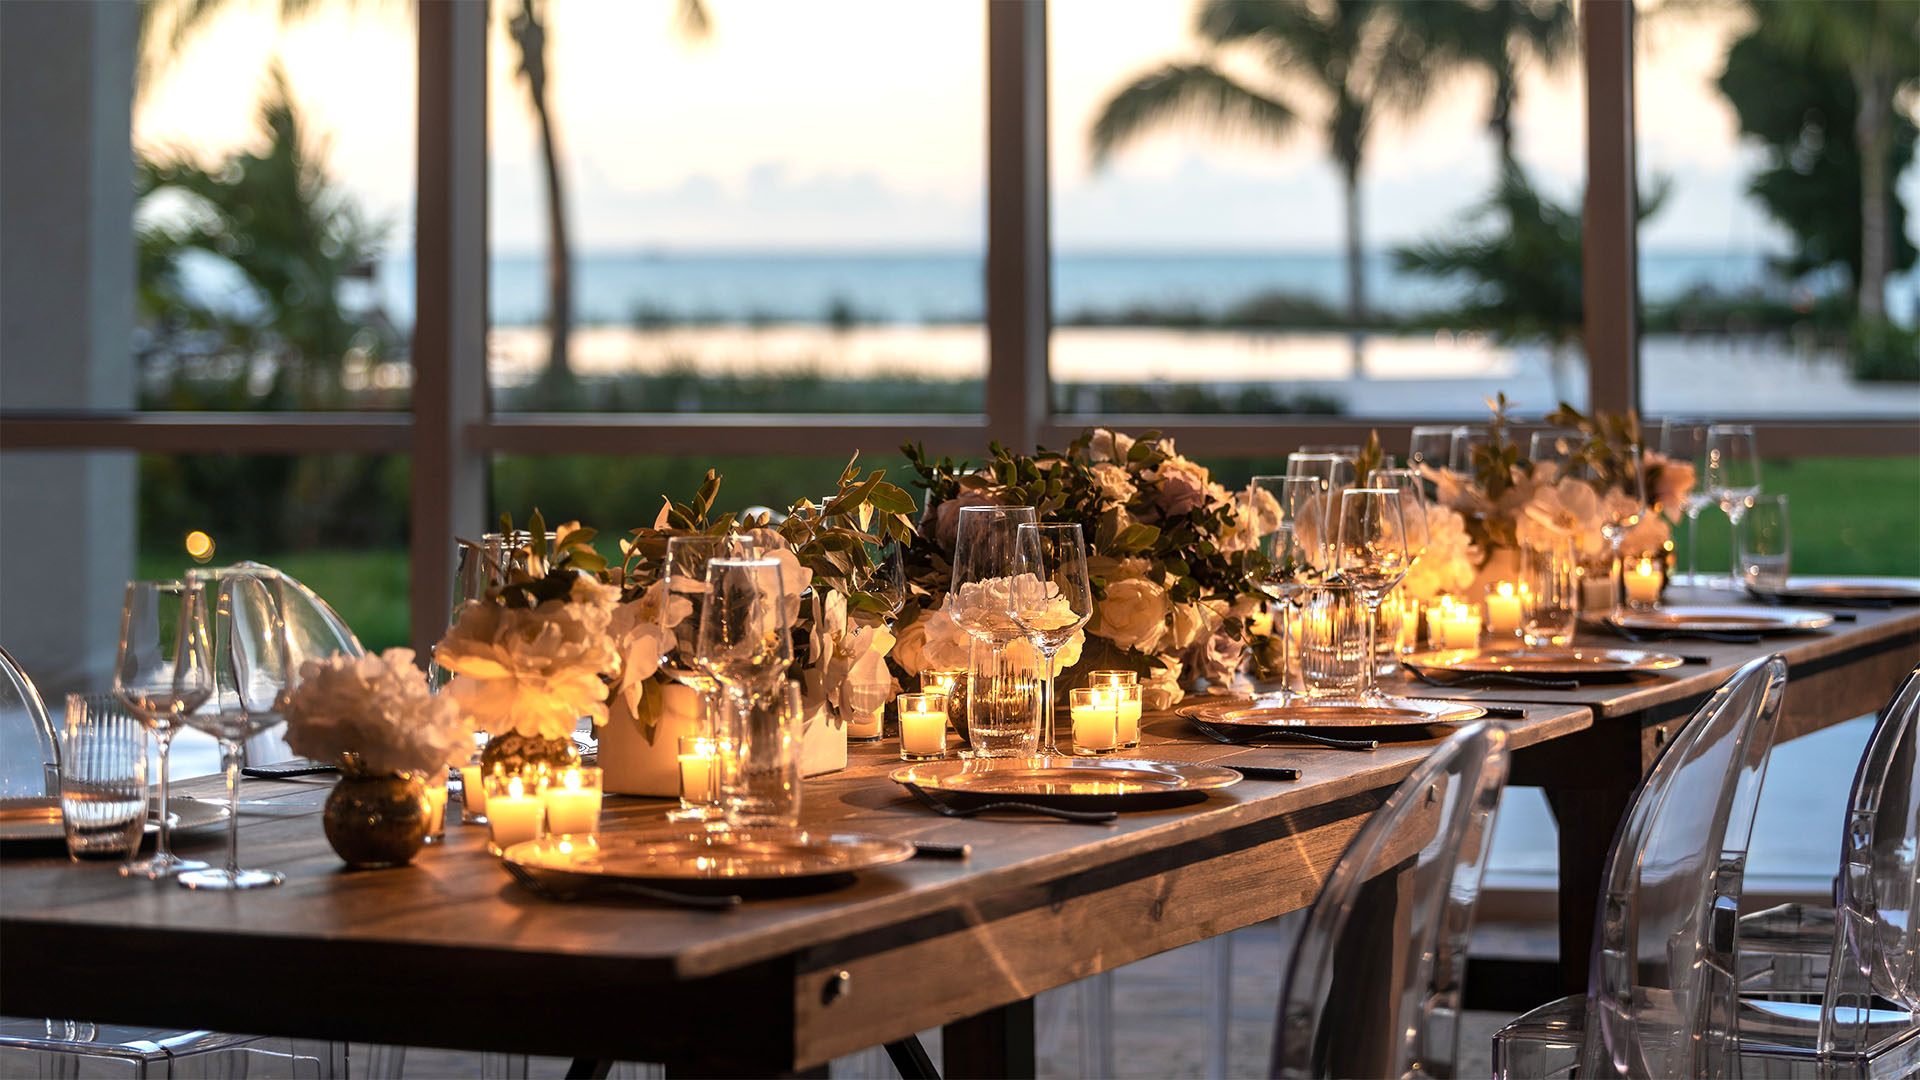 Dining table with a beautiful, candlelit table setting at The Ritz-Carlton, Turks & Caicos